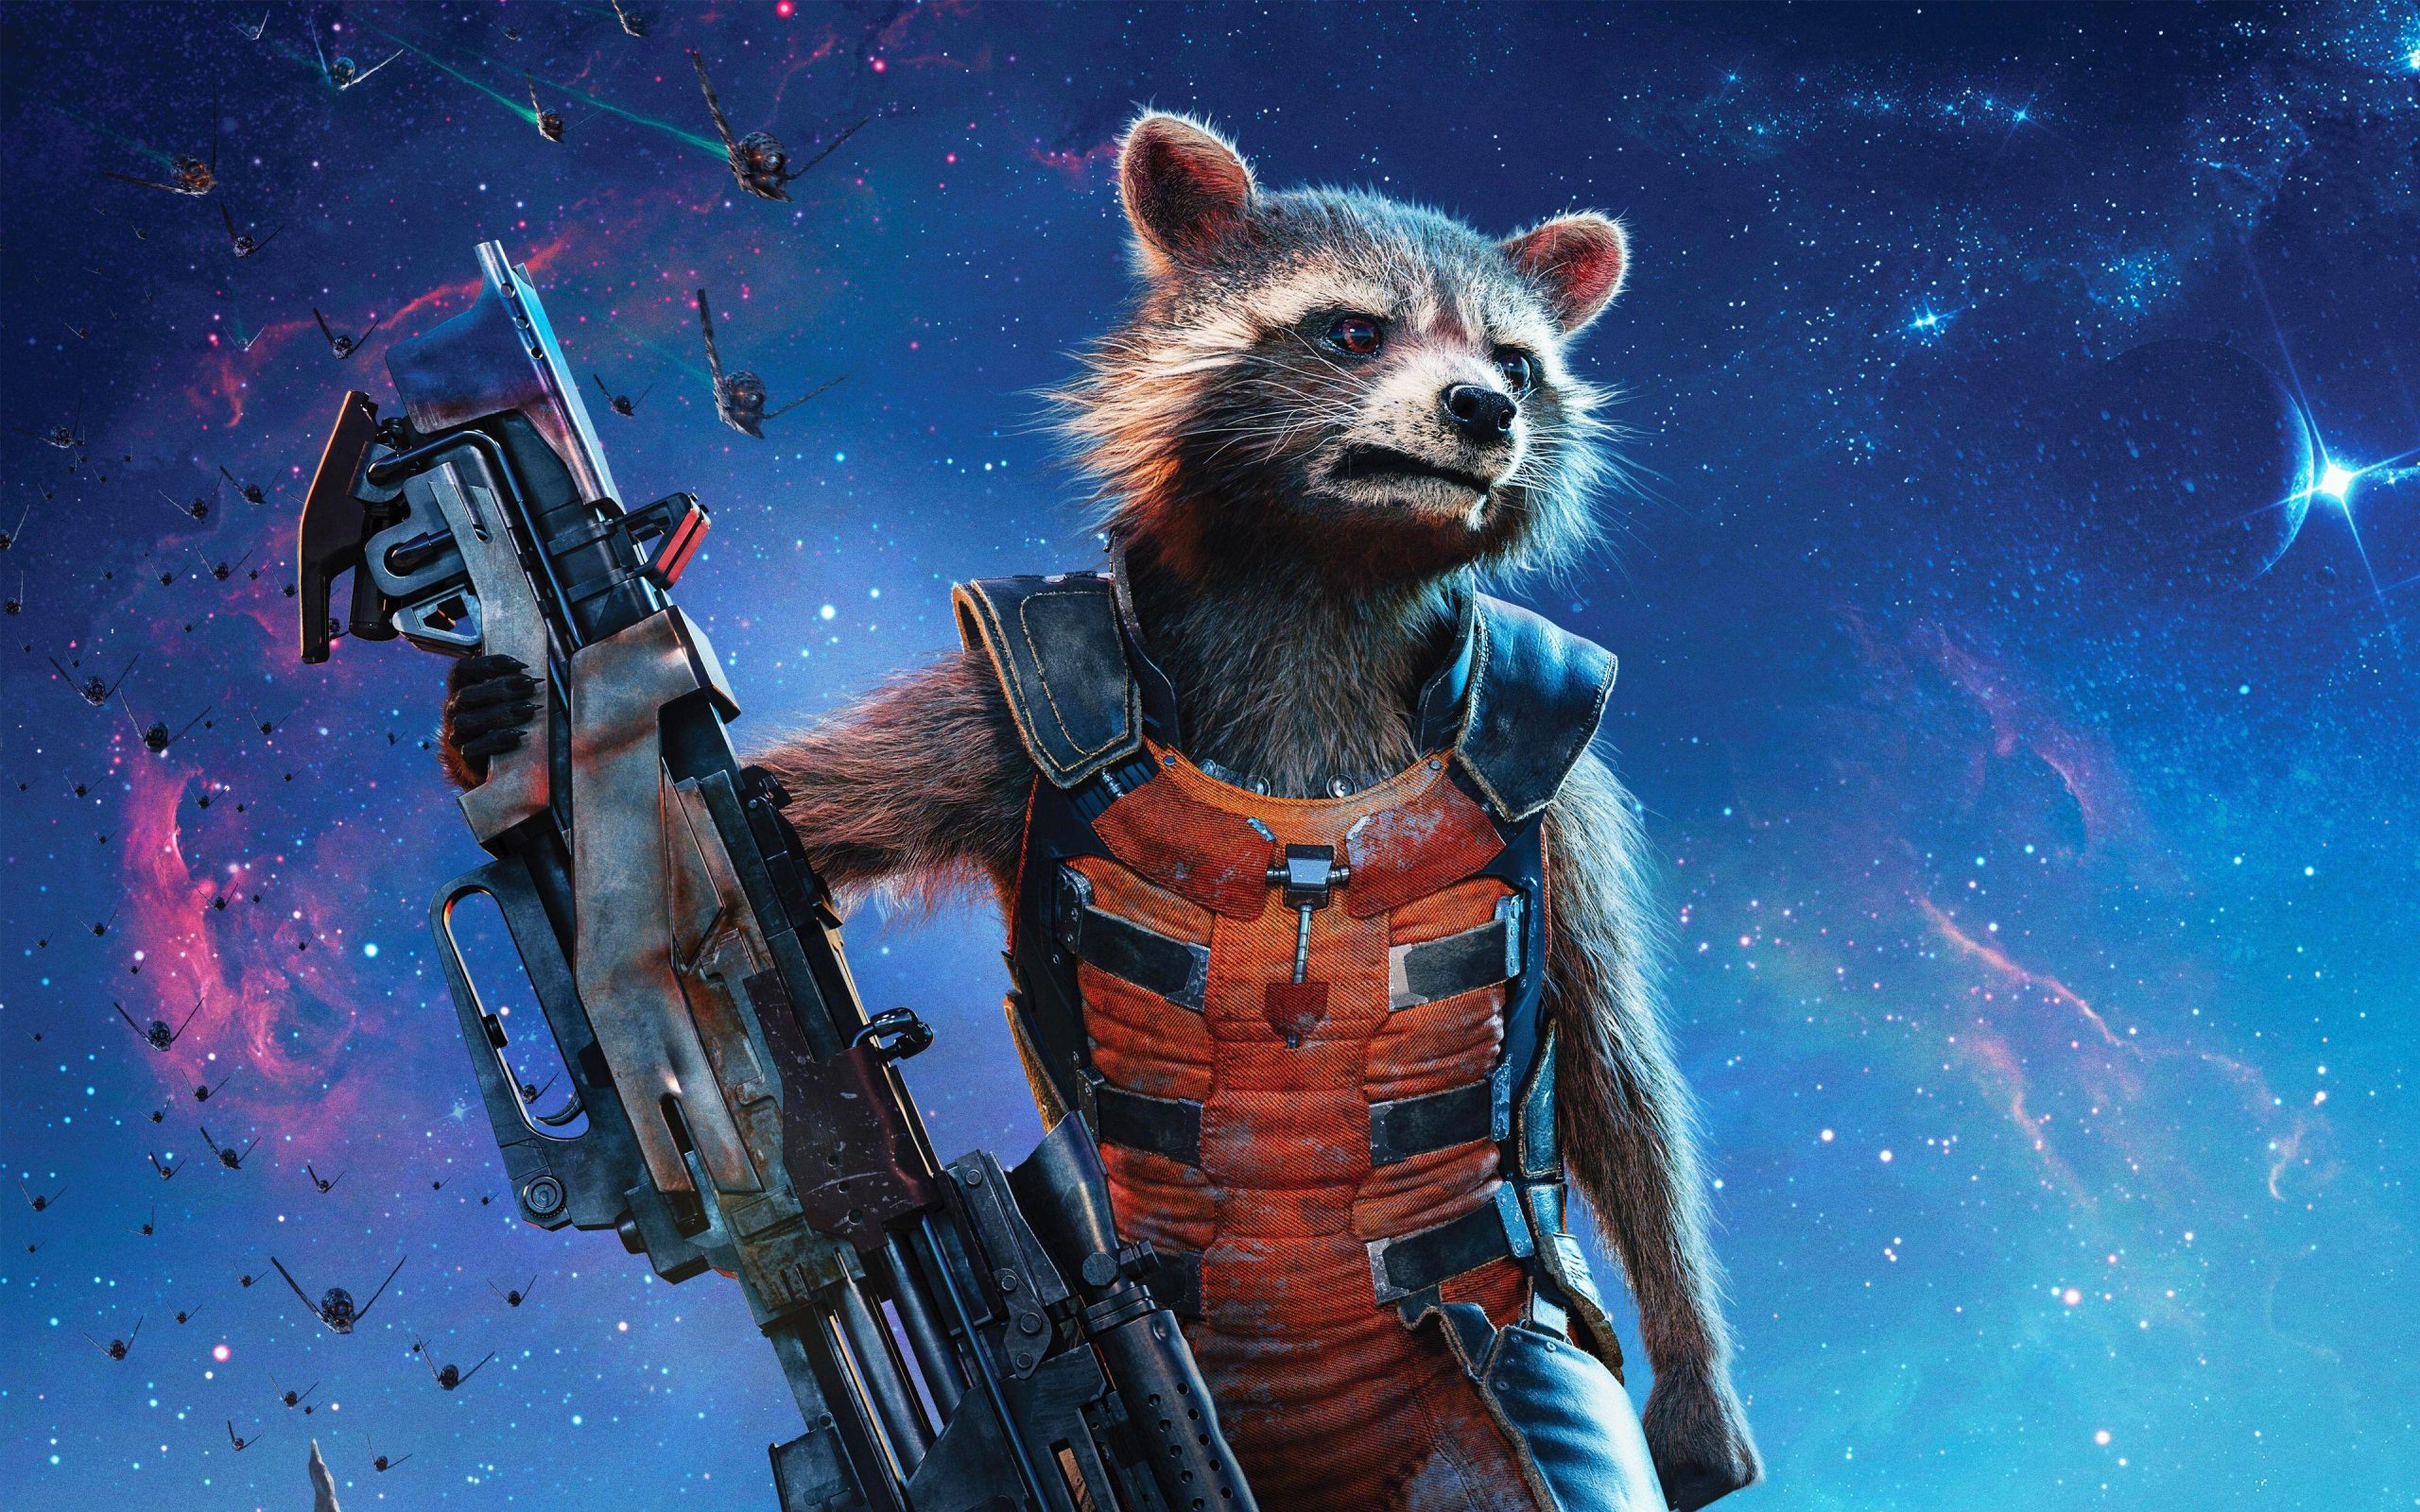 Guardians Of The Galaxy Rocket Wallpapers For Free, Guardians Of The Galaxy Rocket, Movies